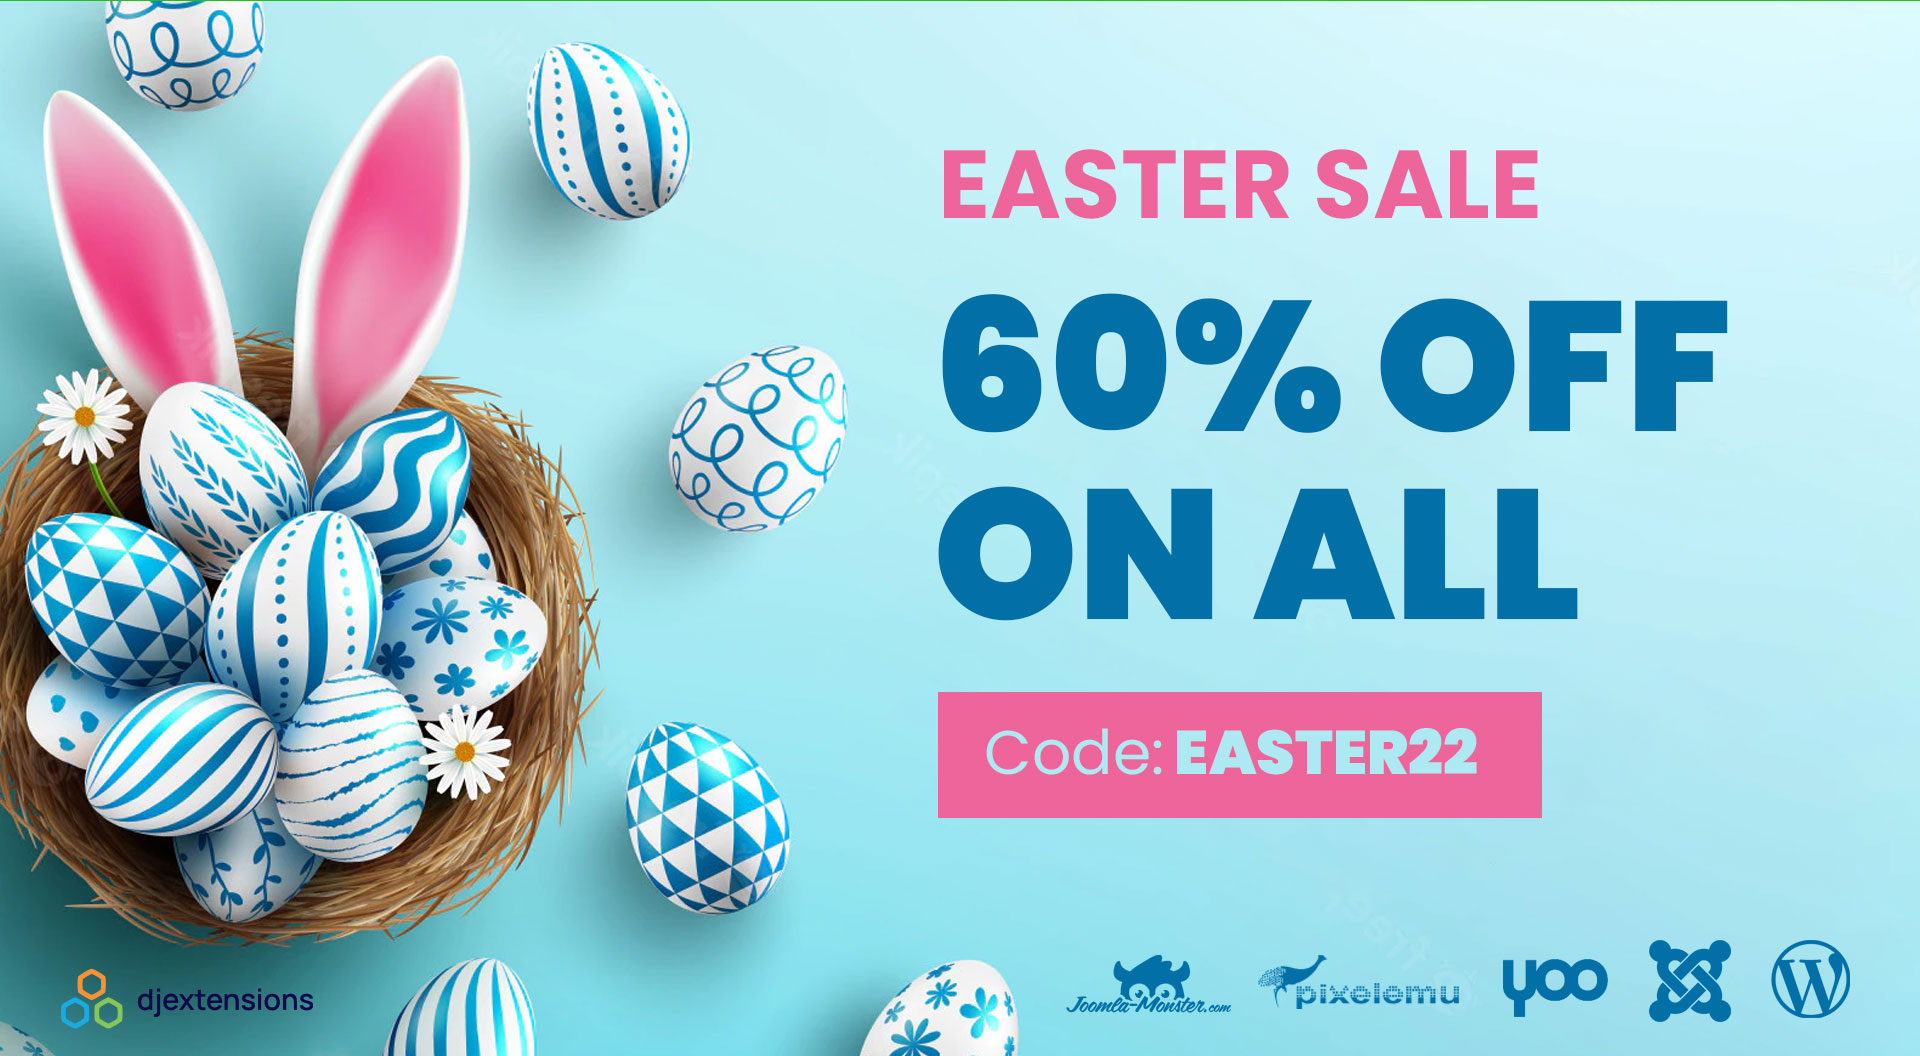 Easter Sale 2022! Save 60% Storewide